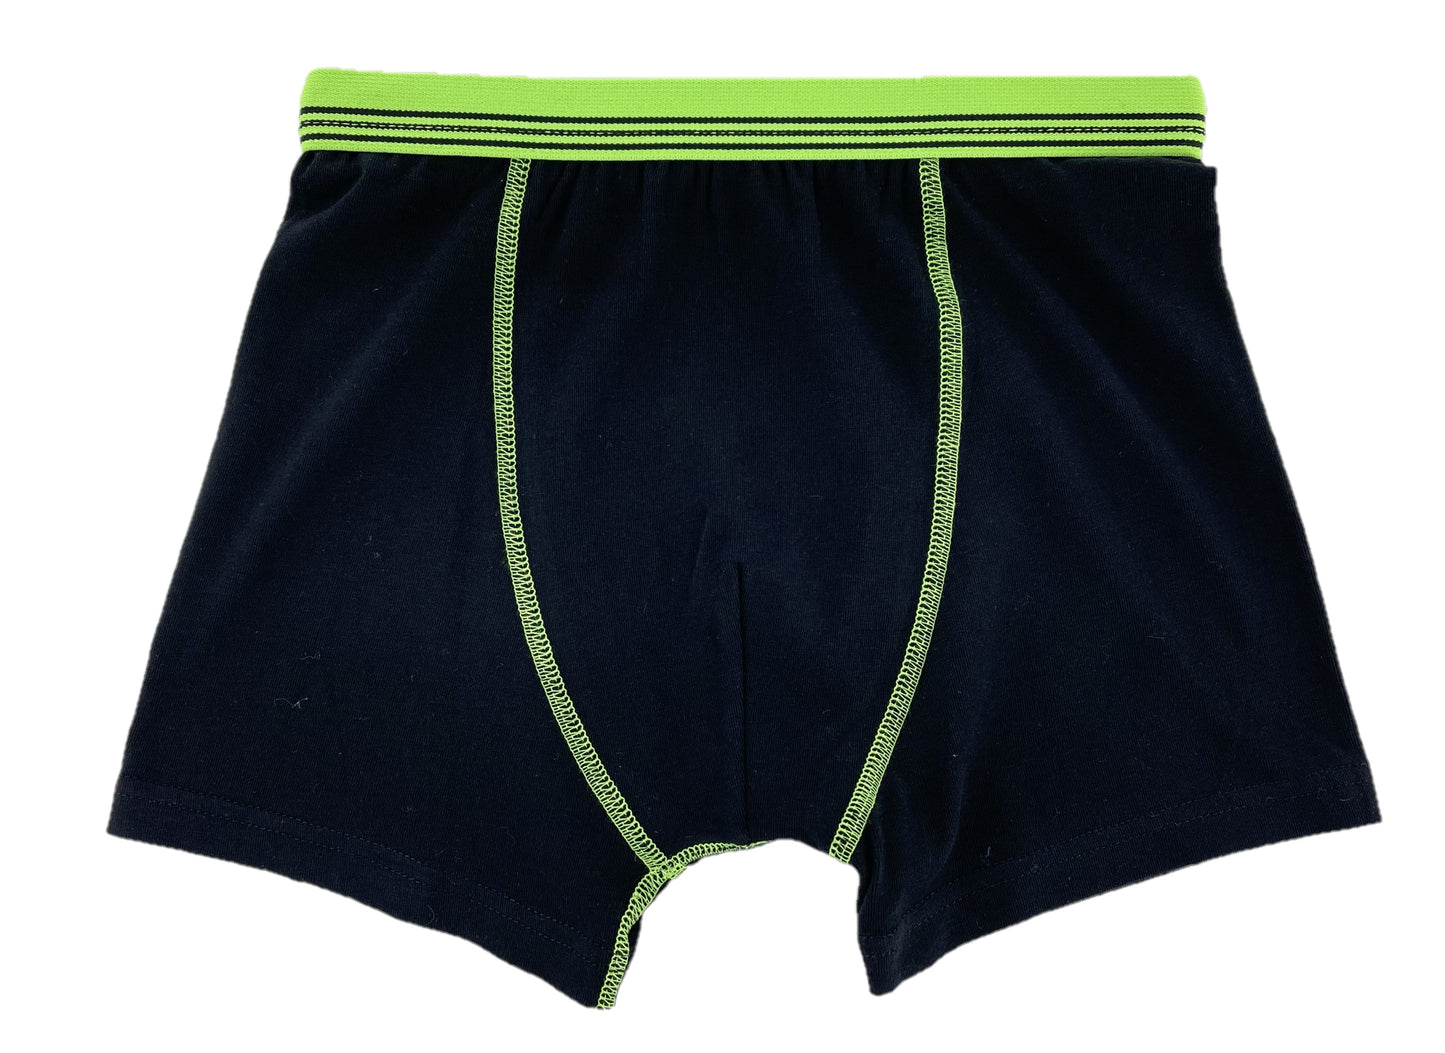 6 Pairs Boys Stretch Cotton Jersey Trunks Boxer Shorts